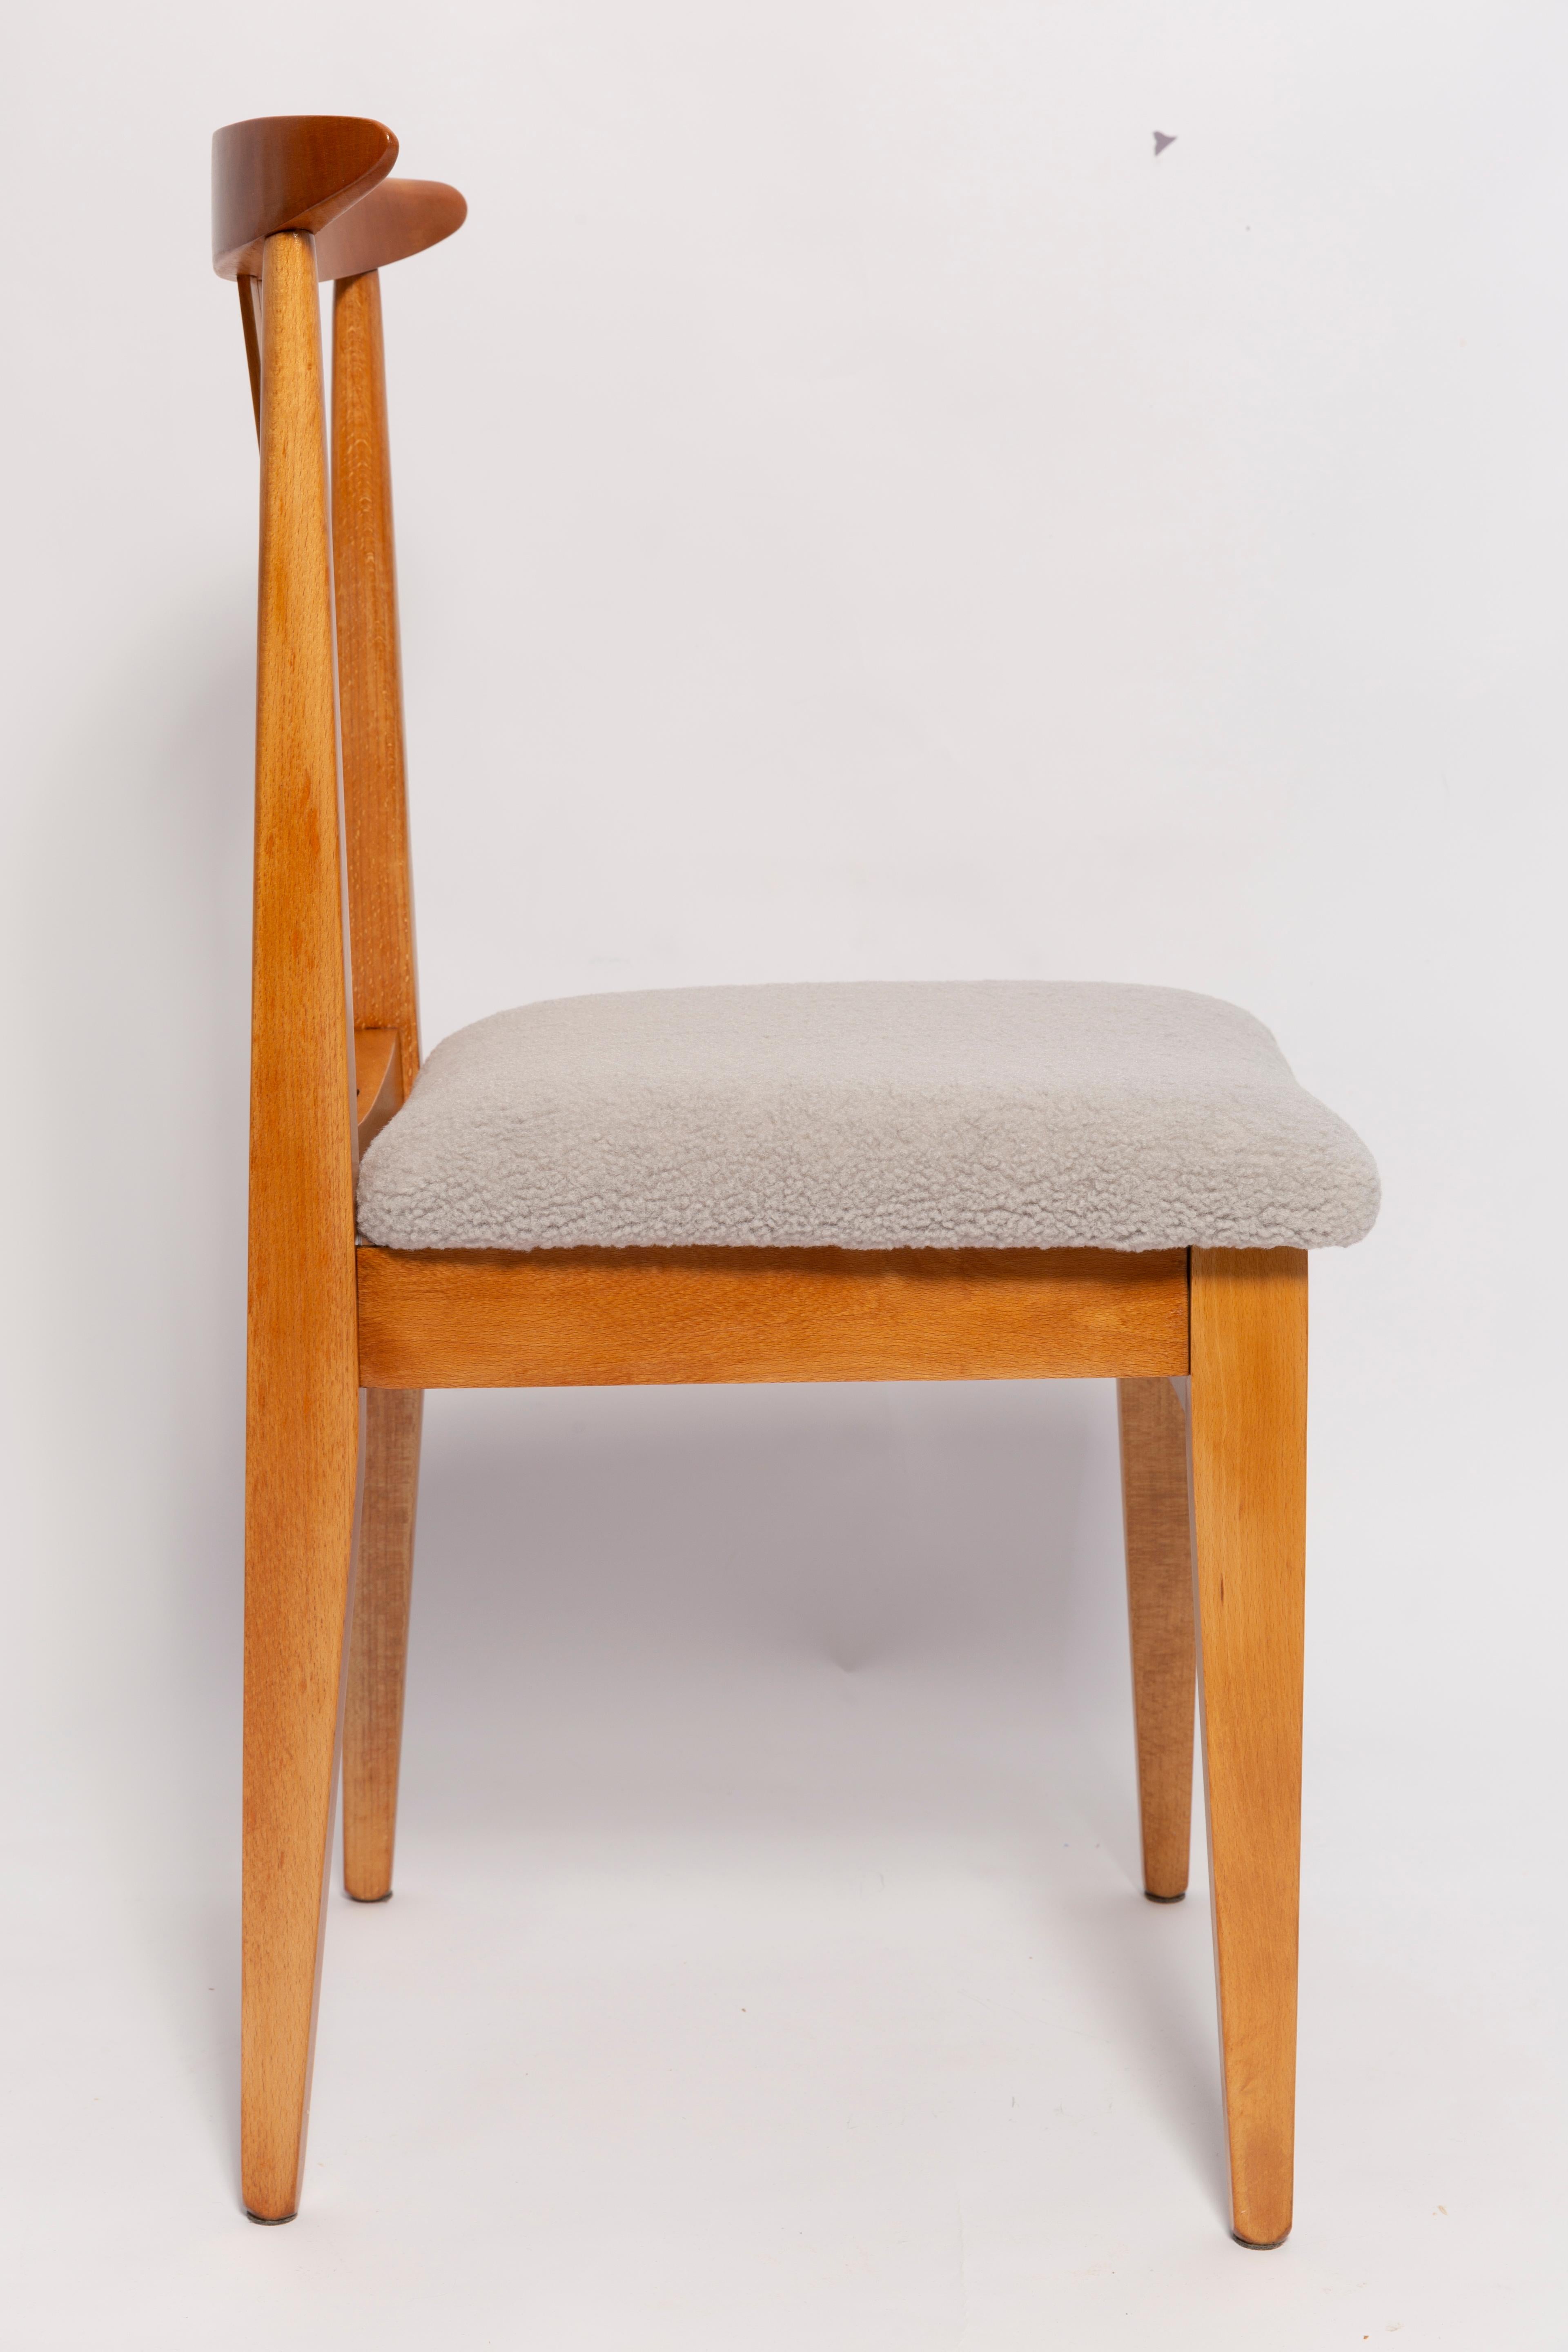 Polish Set of Eight Mid-Century Linen Boucle Chairs, by M. Zielinski, Europe, 1960s For Sale